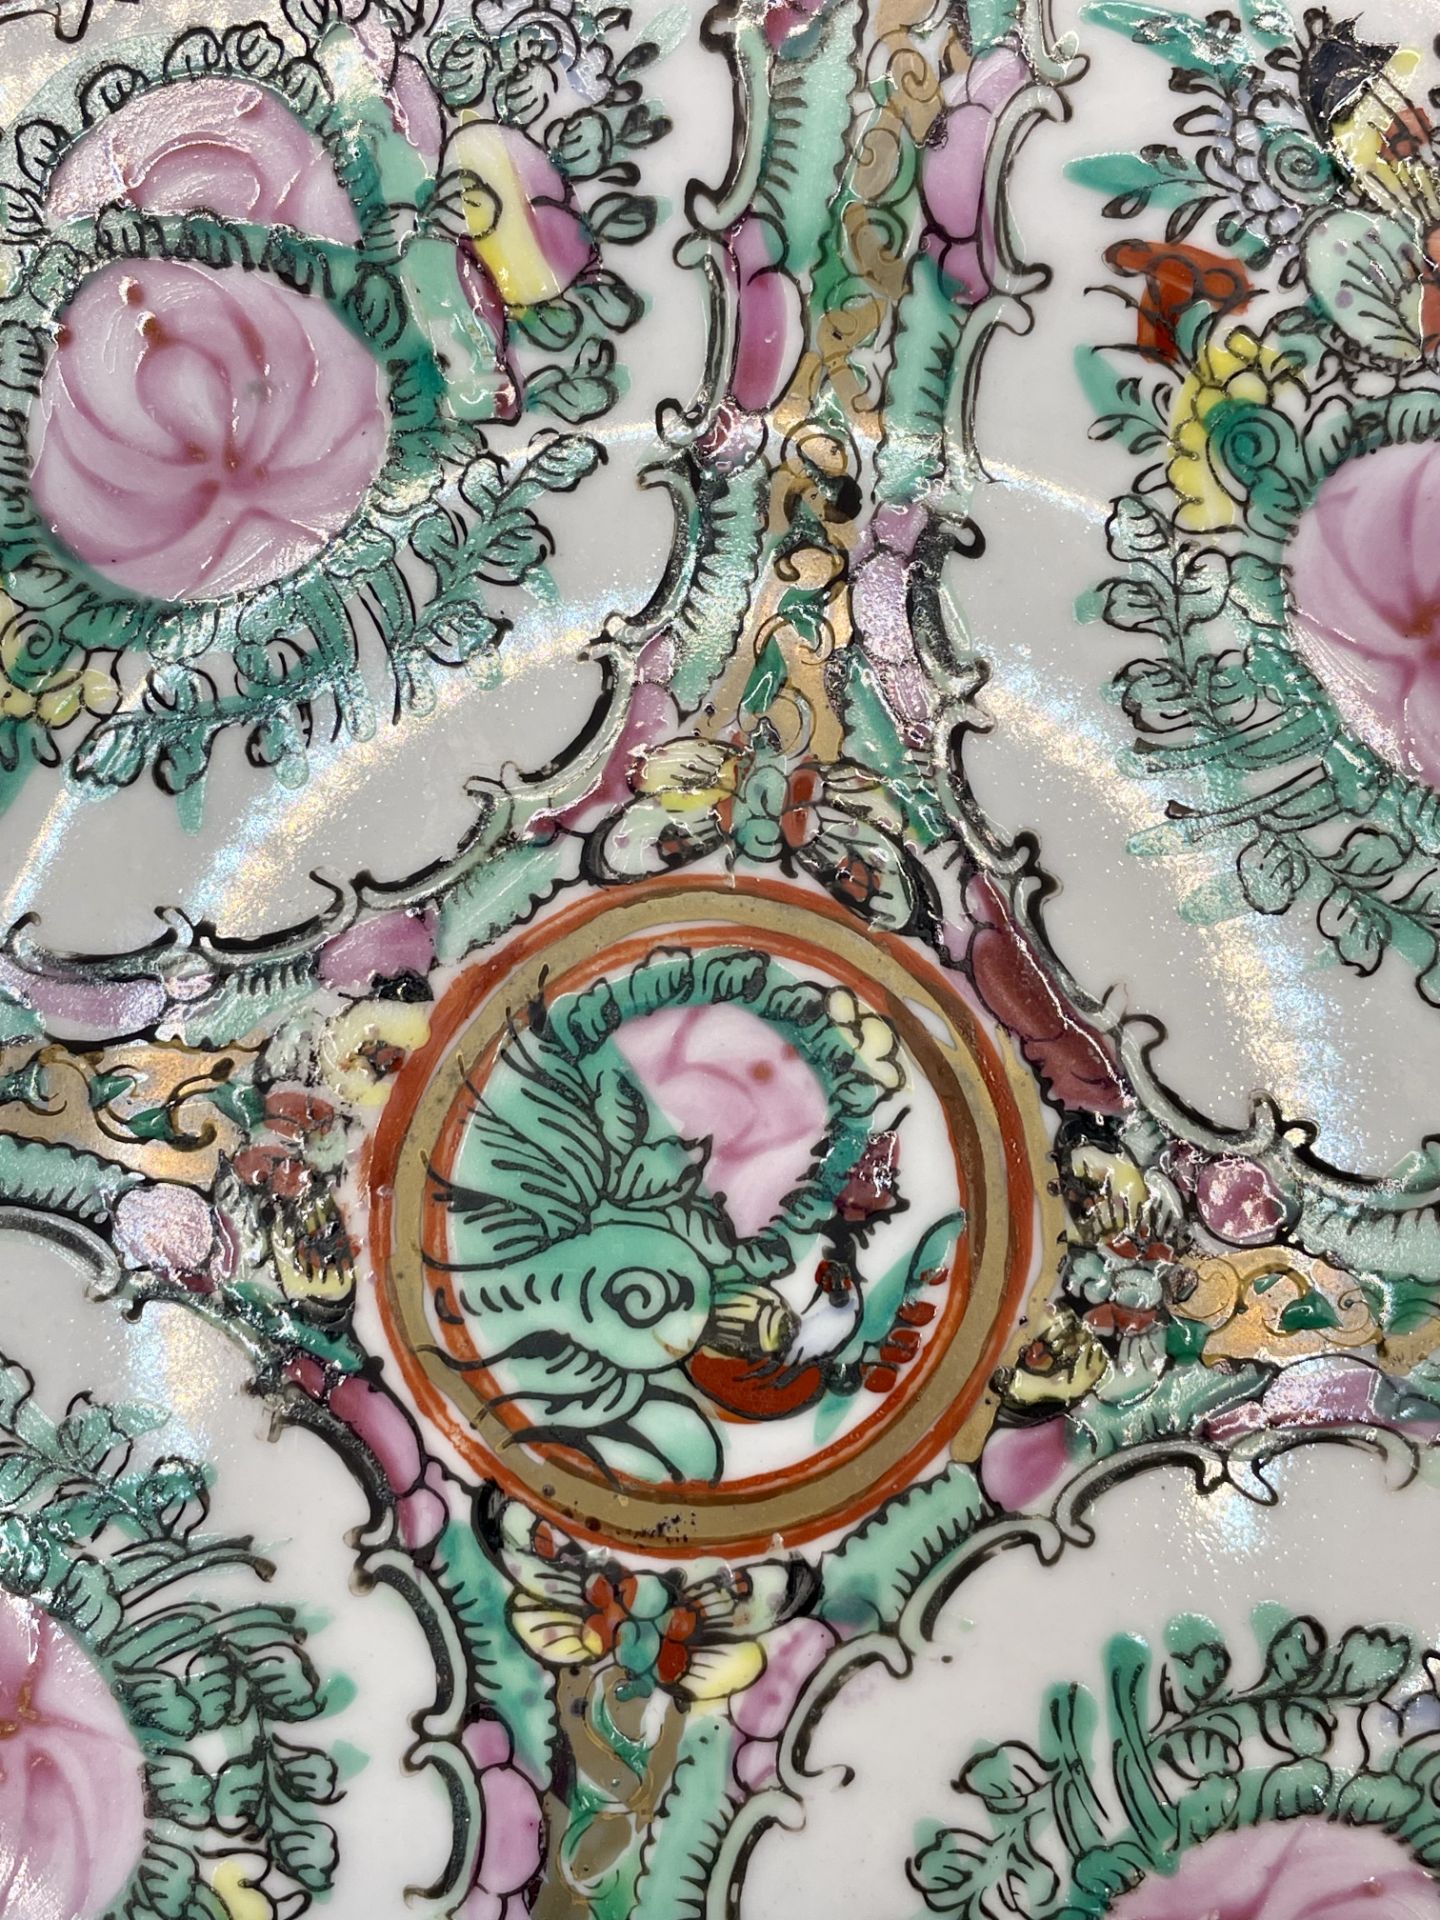 Antique Chinese Famille Rose Porcelain Plate, Circa 1880-1890. - Image 3 of 7